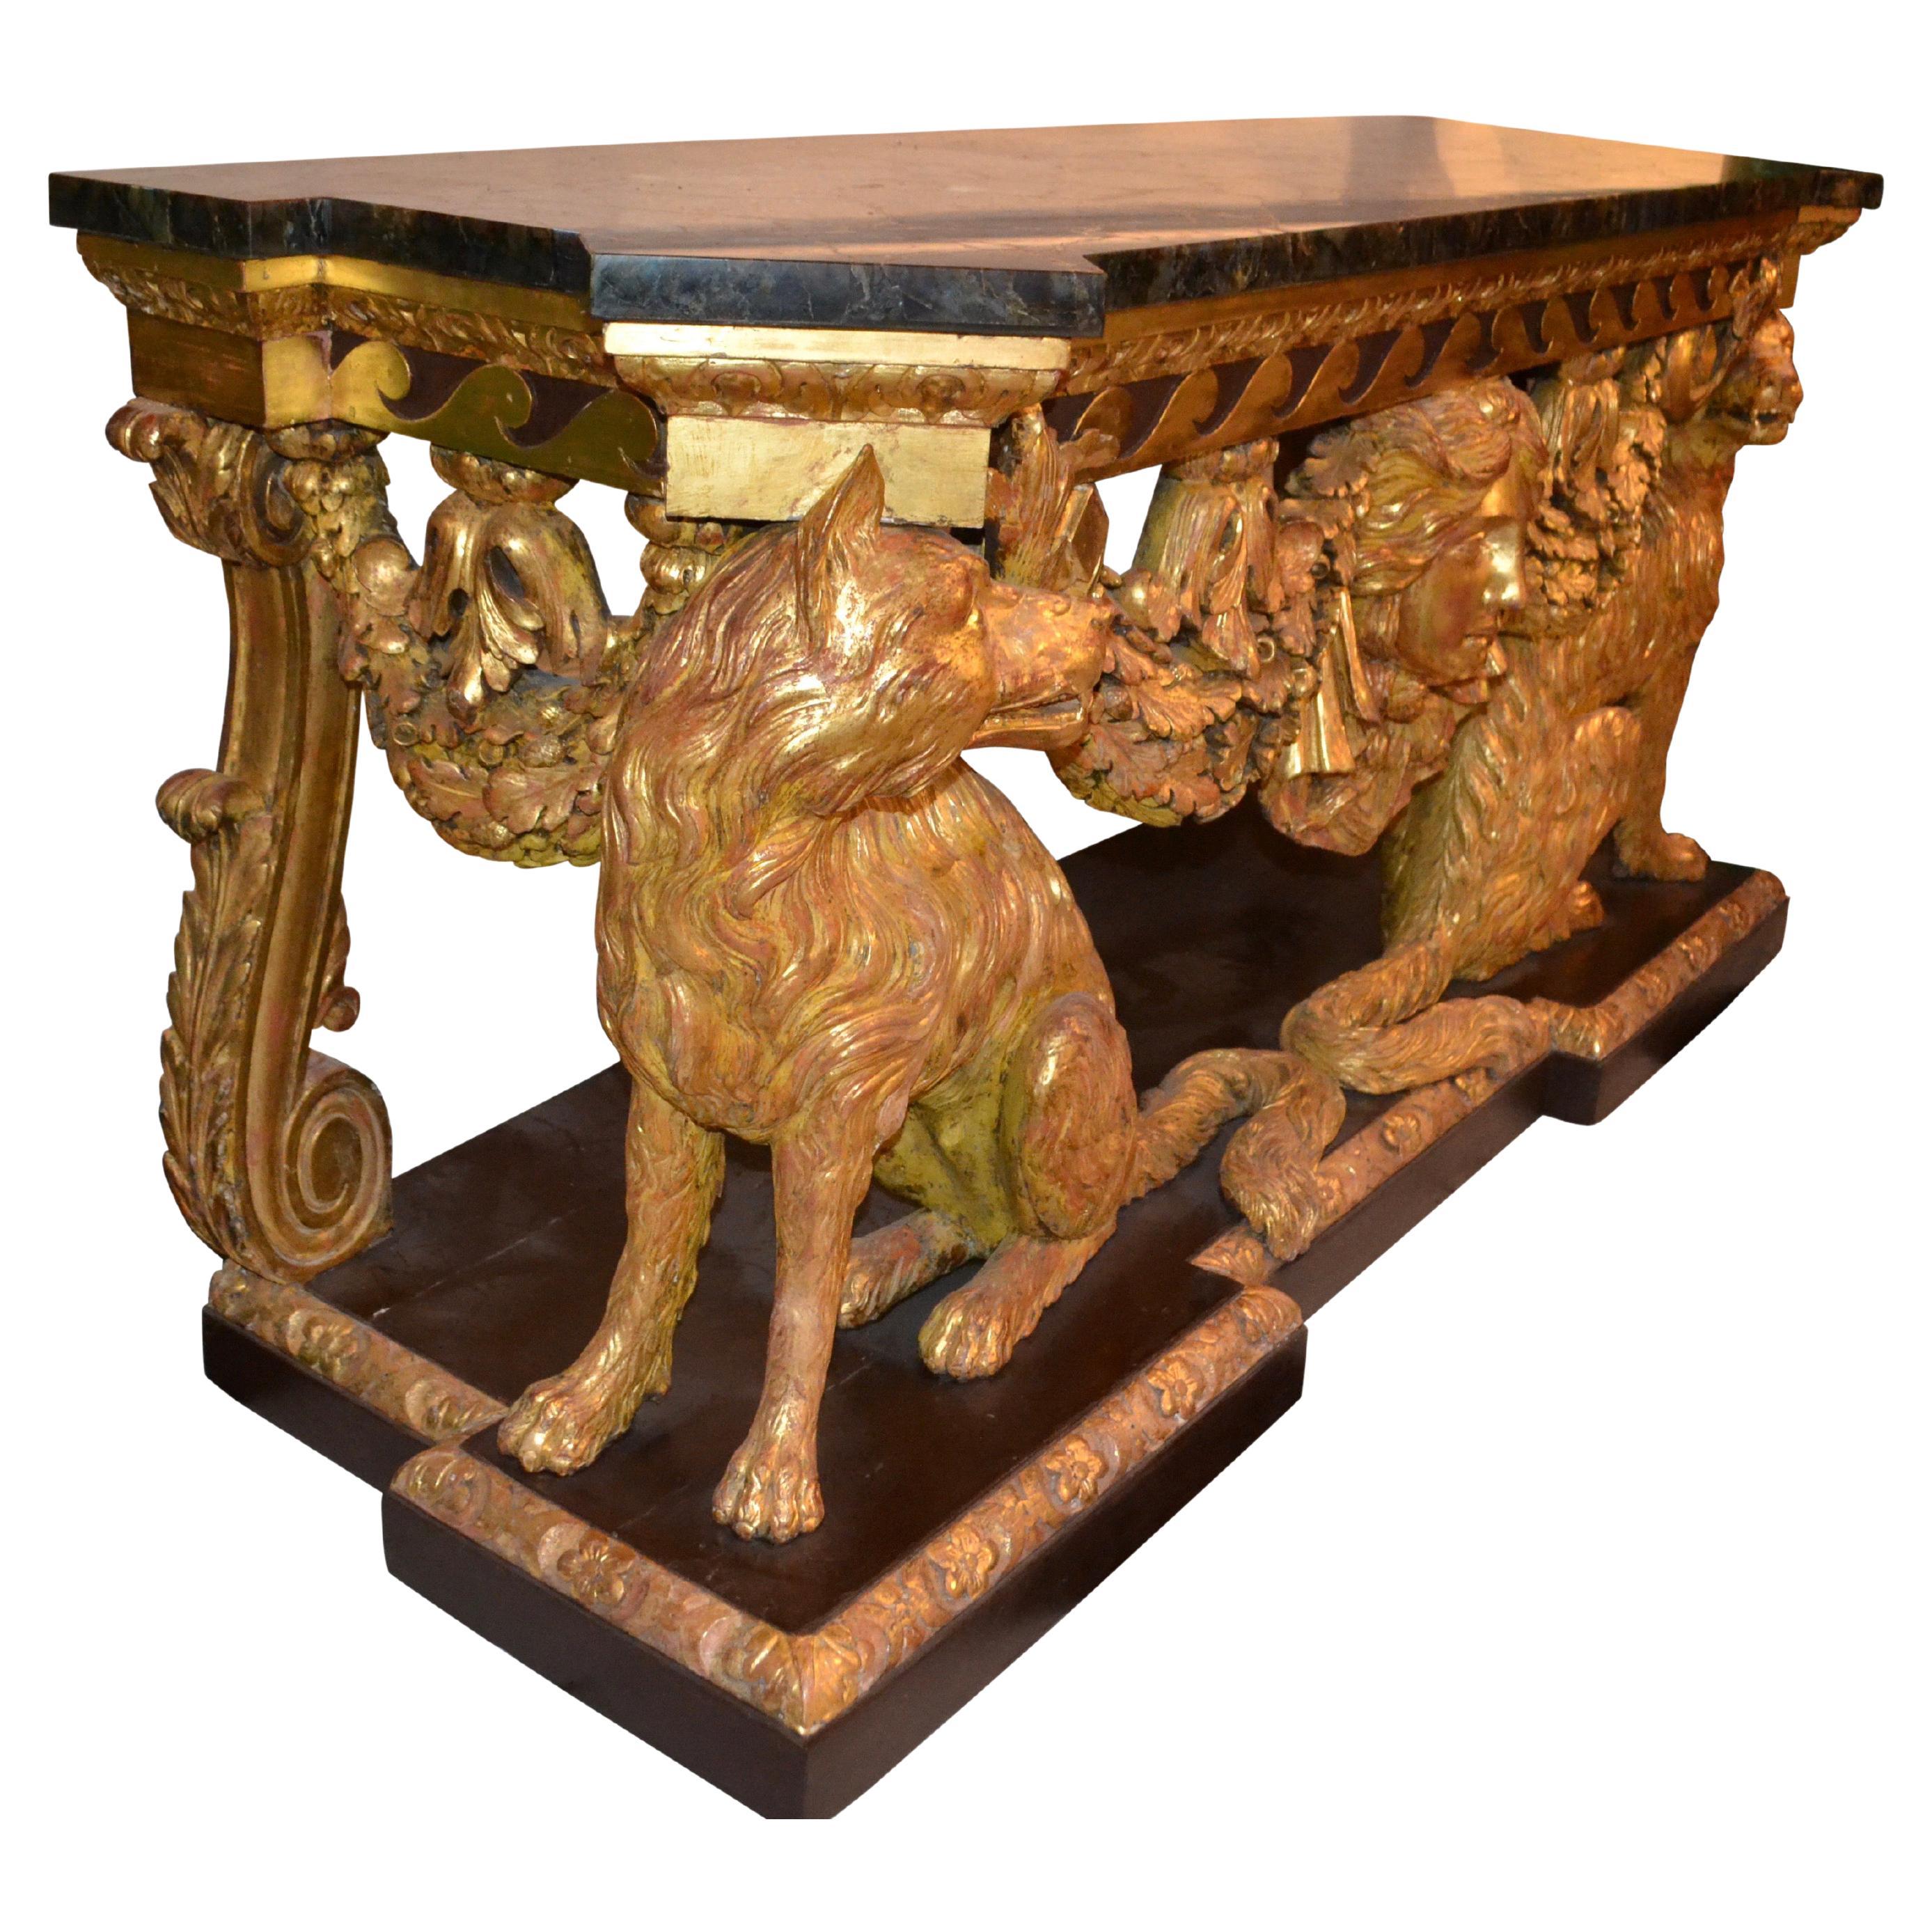 George II.-Stil Lenygon and Co Giltwood Wolf-Konsole nach William Kent